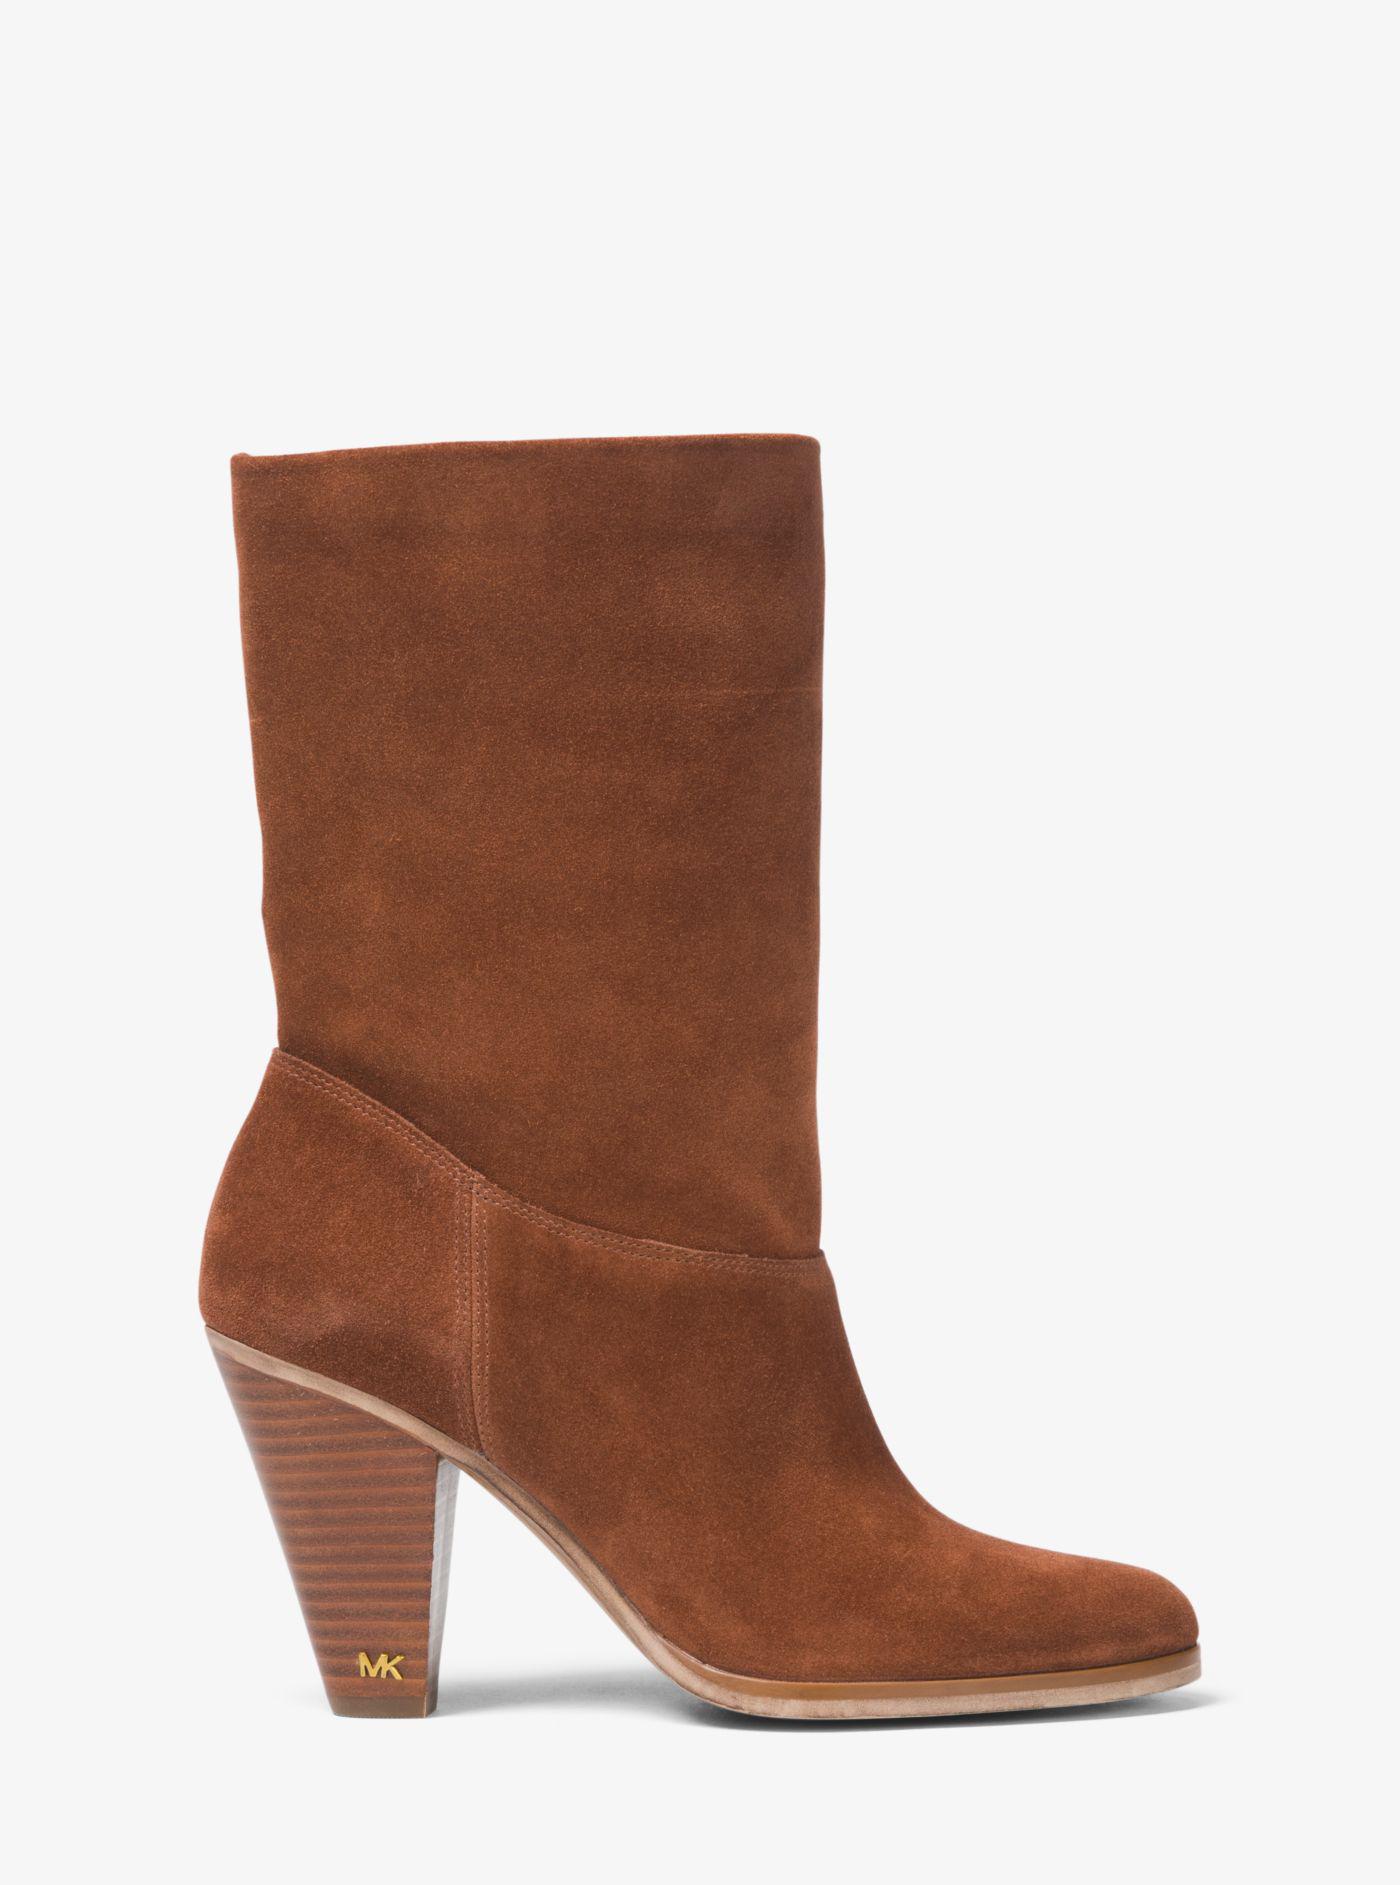 Michael Kors Divia Suede Ankle Boot in 